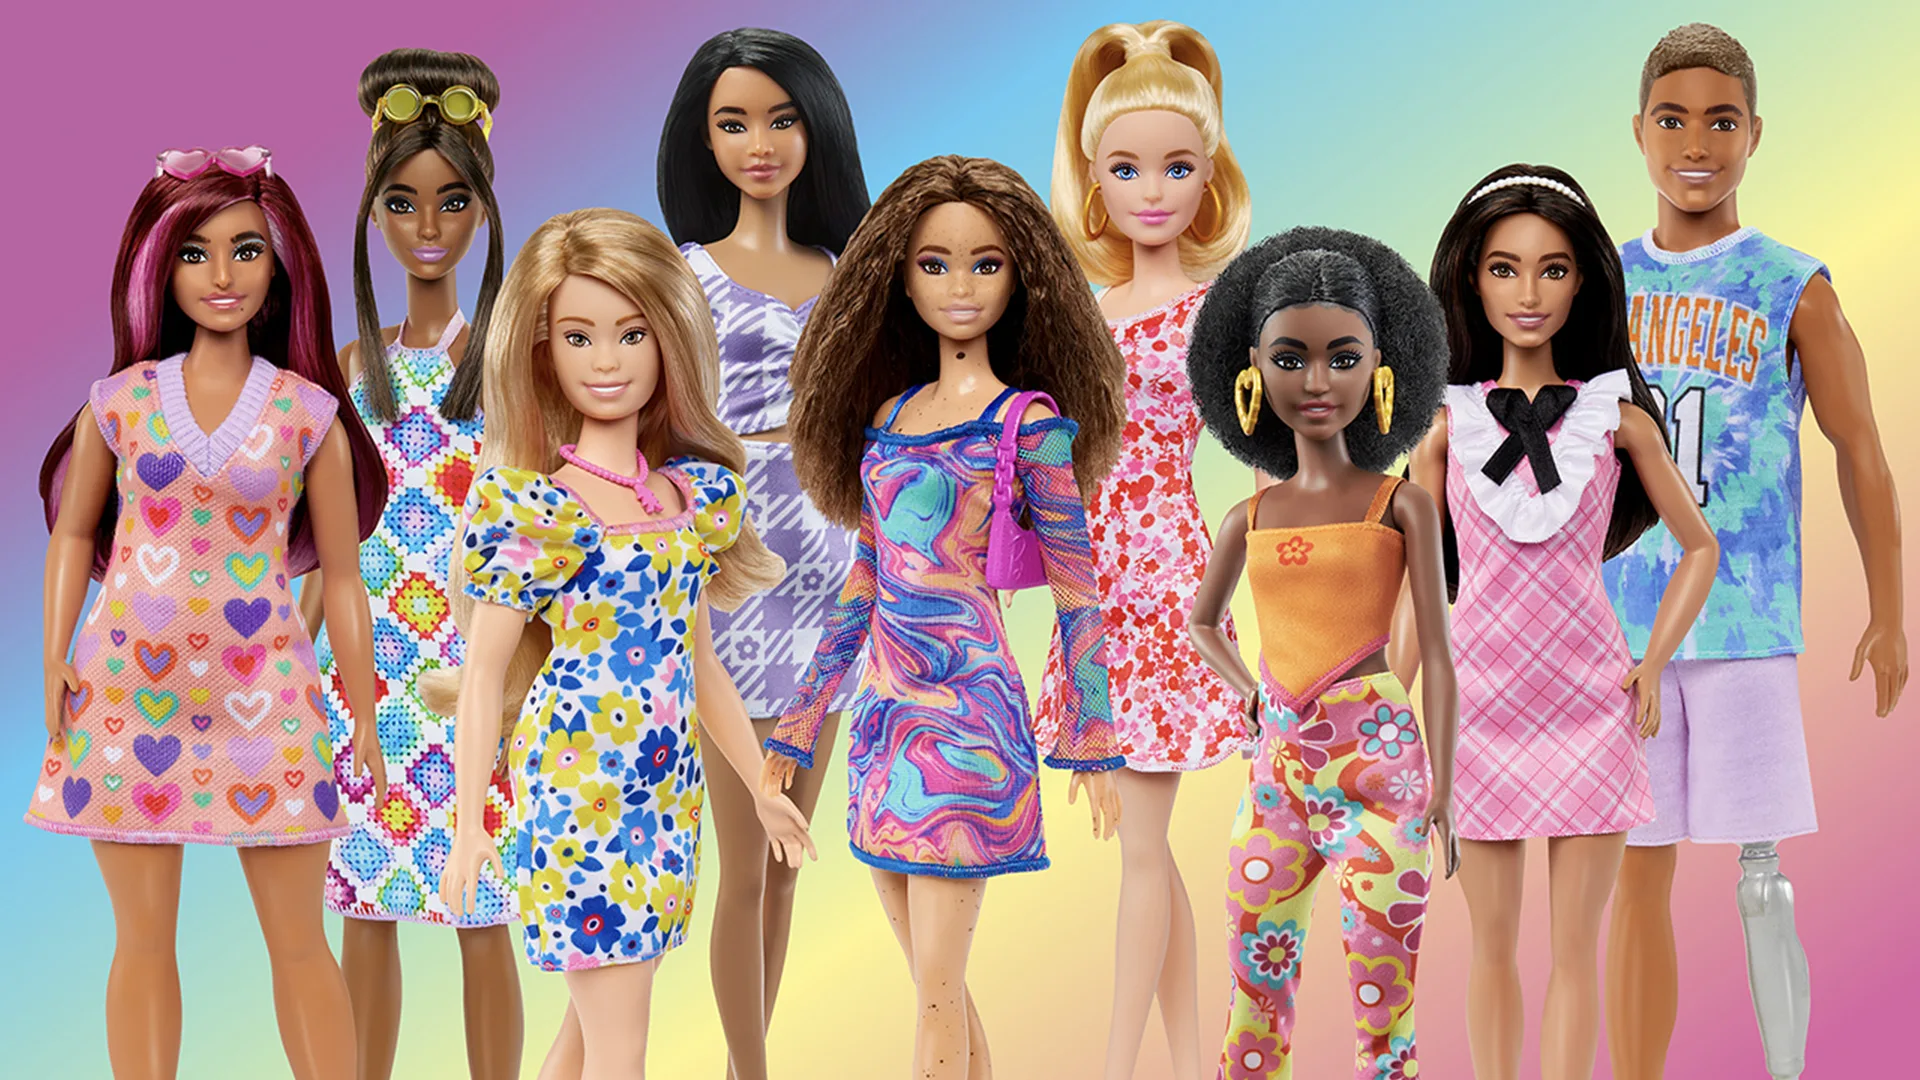 Group of fashion Barbies wearing different outfits